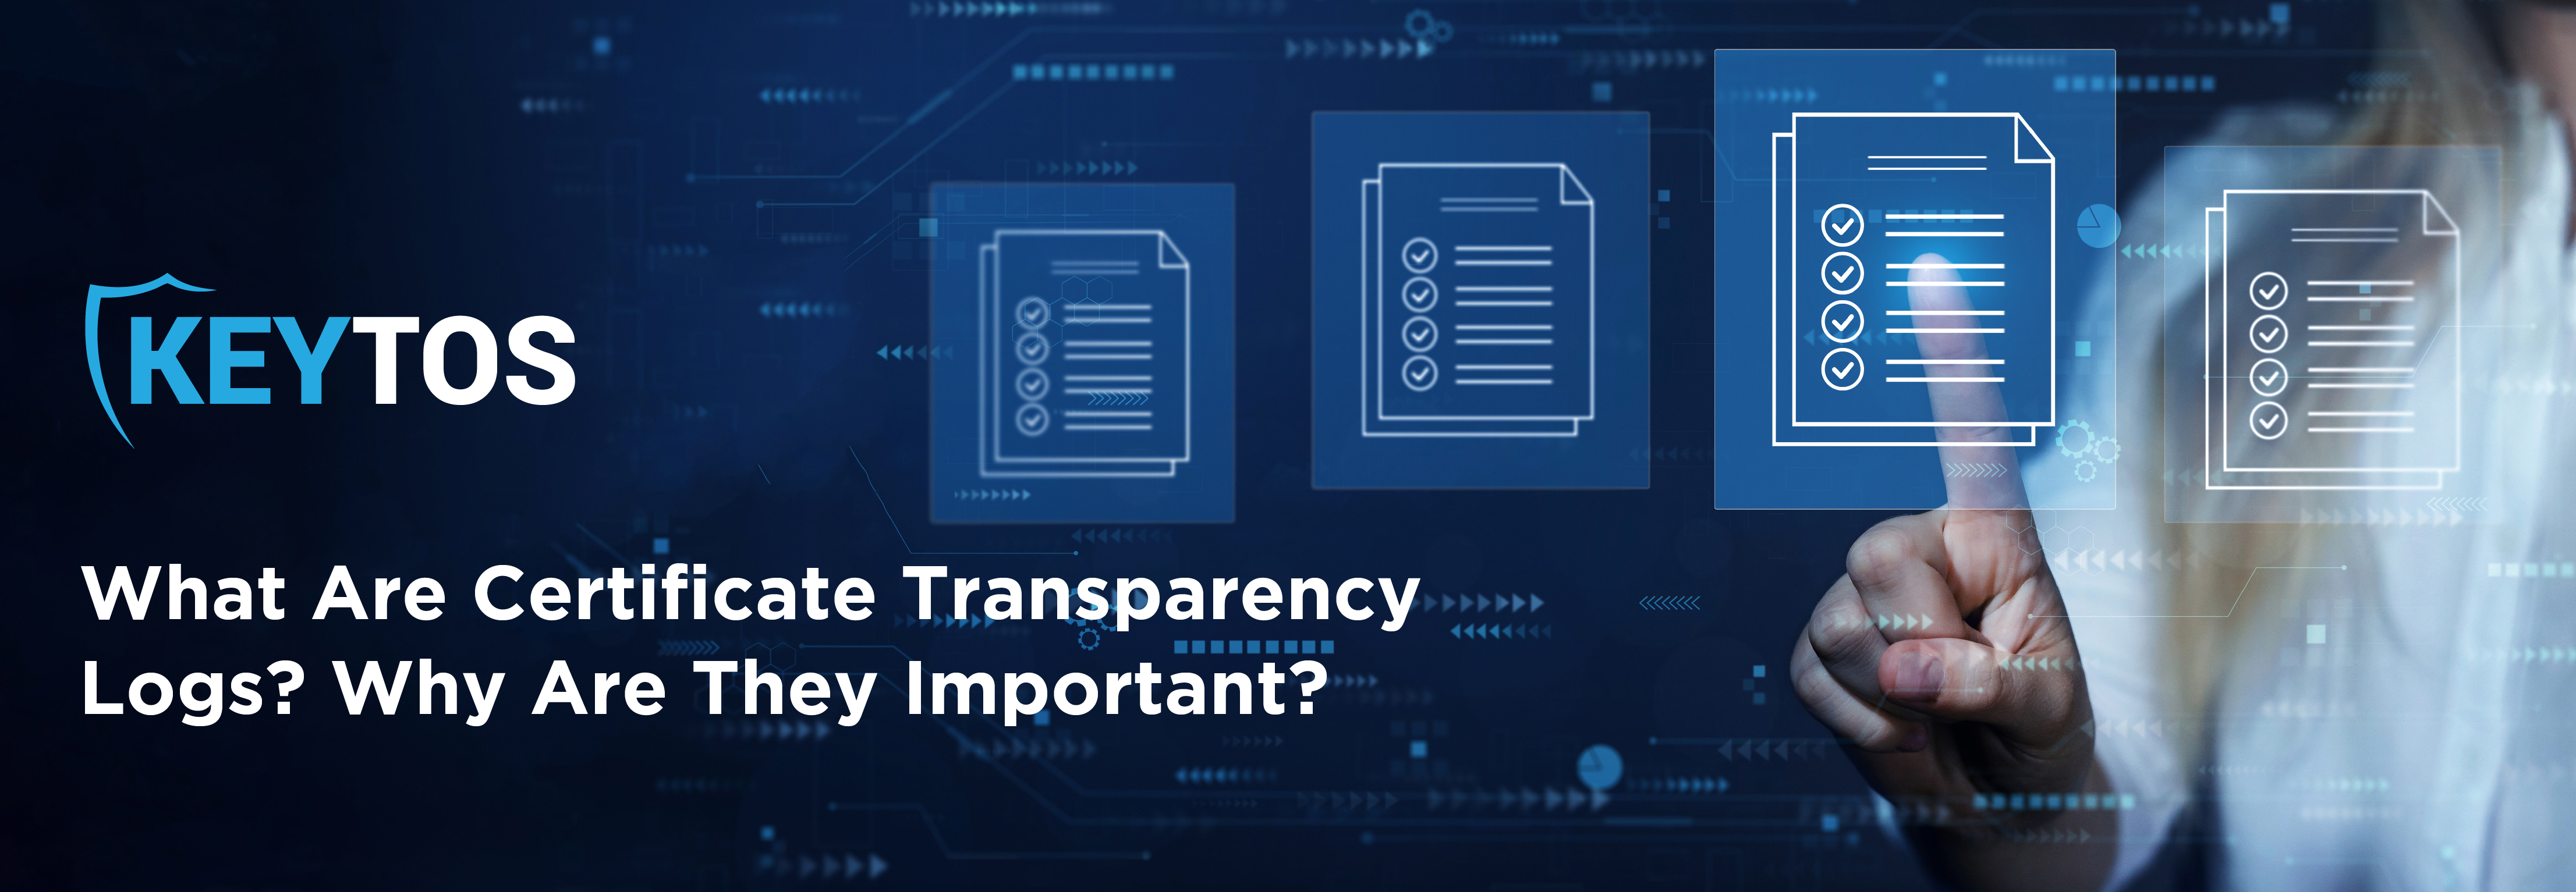 What are Certificate Transparency Logs and Why are CT Logs Important?